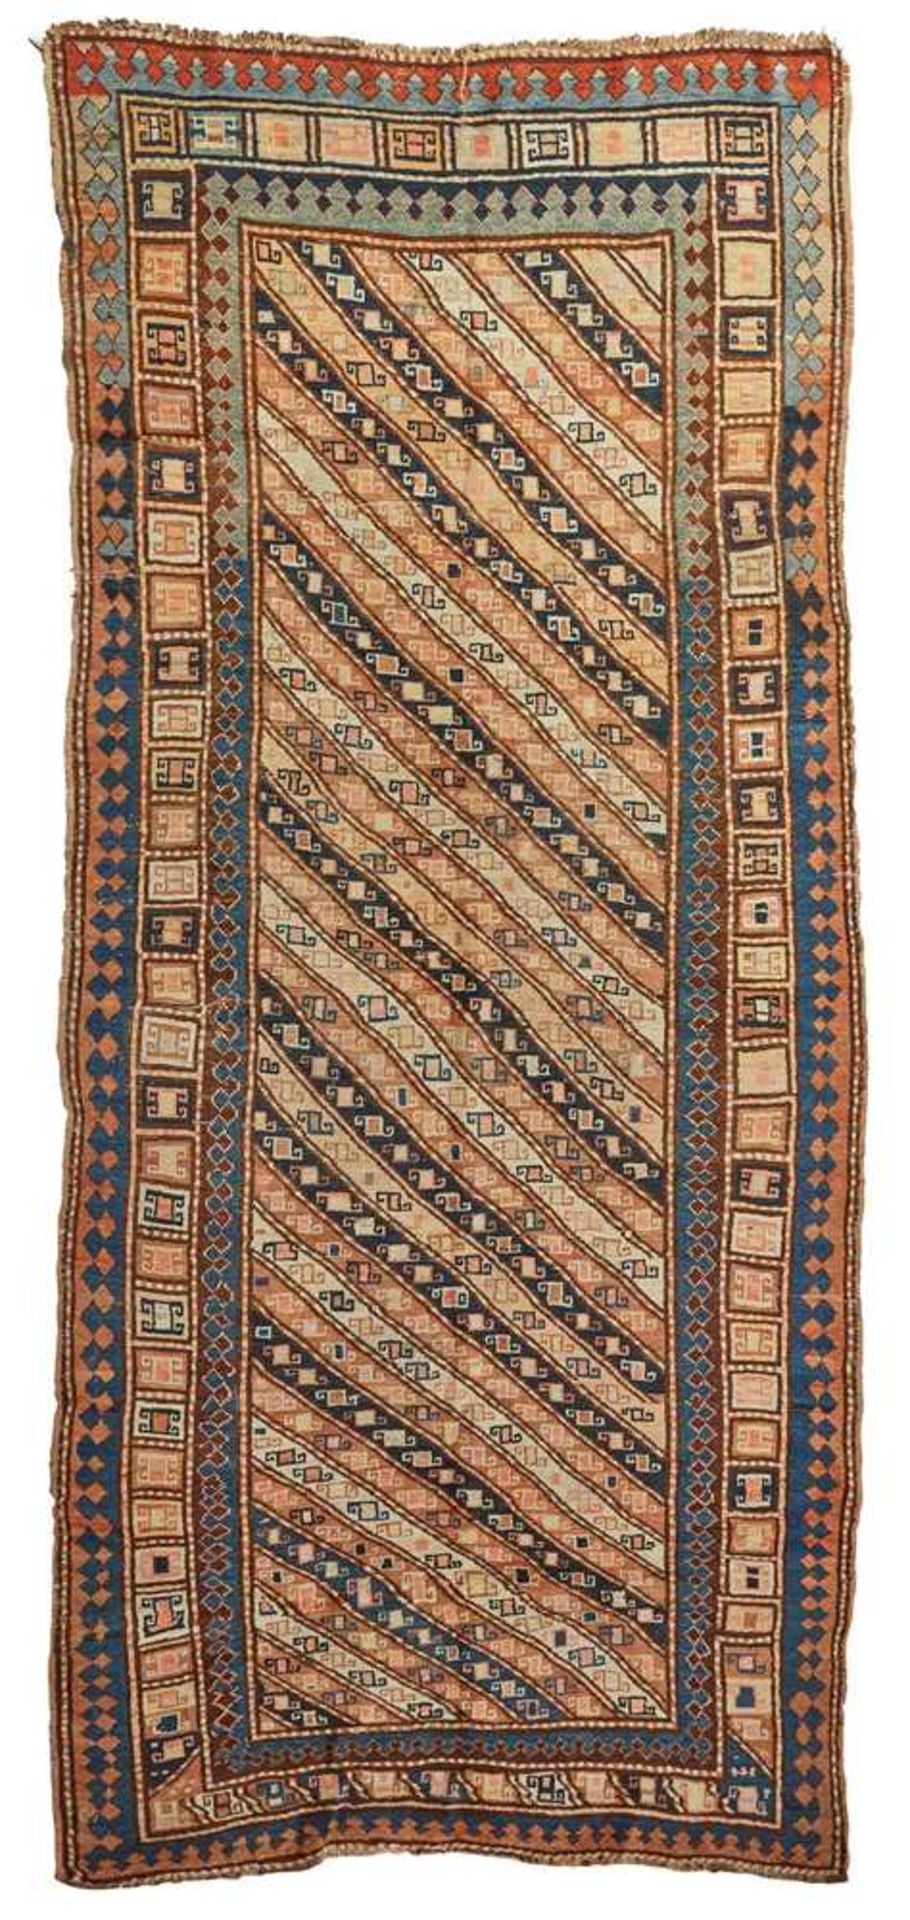 GENDJE LONG RUG SOUTH CAUCASUS, LATE 19TH/EARLY 20TH CENTURY